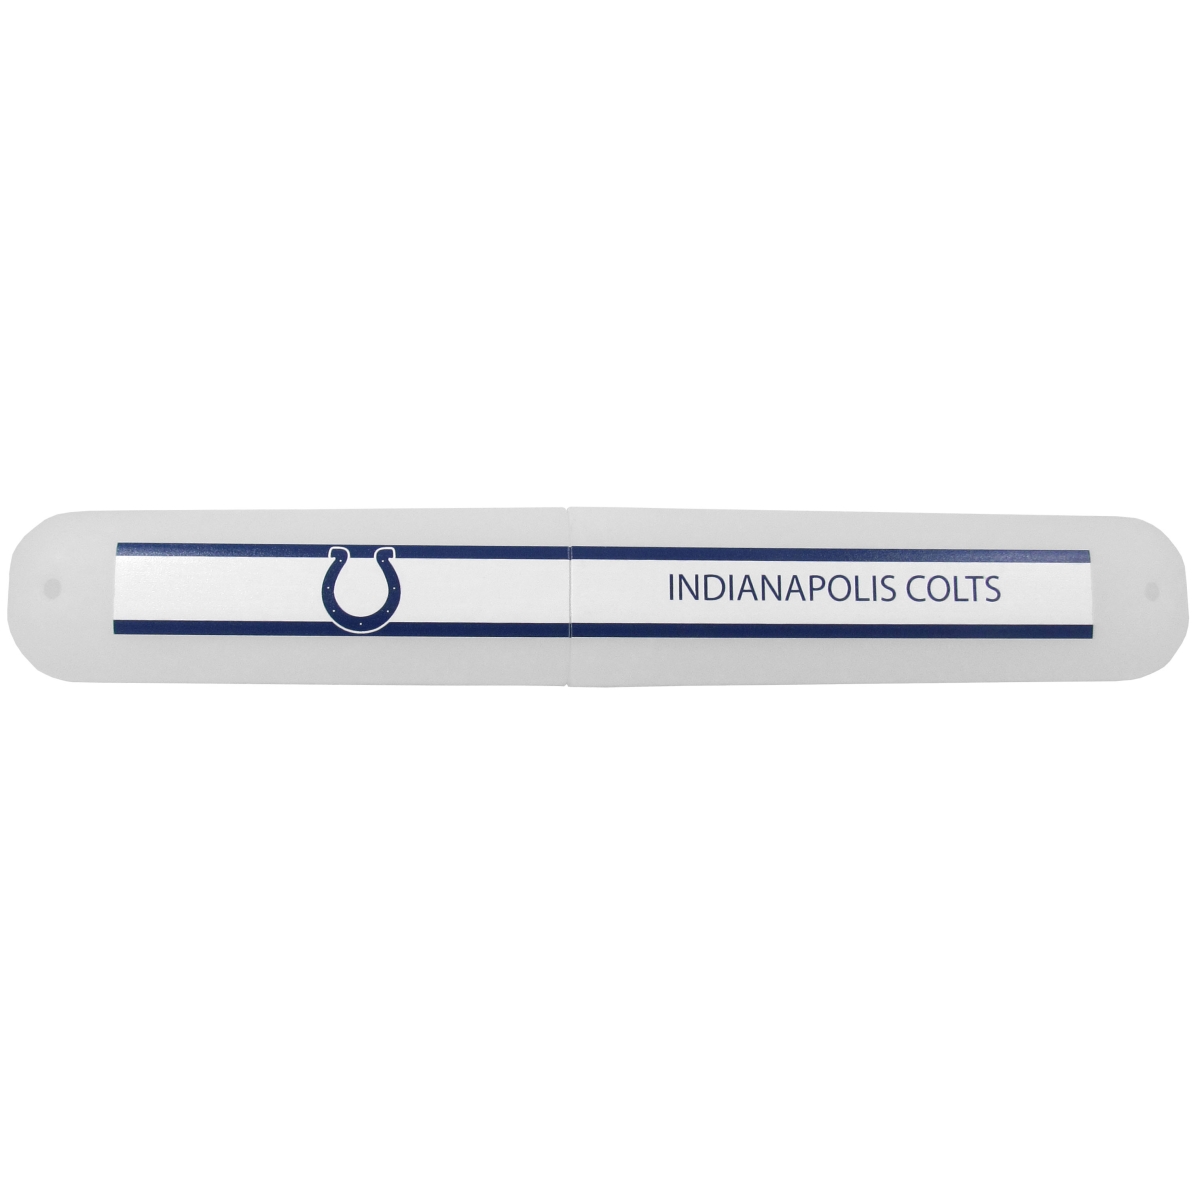 Picture of Siskiyou FTBC050 Unisex NFL Indianapolis Colts Travel Toothbrush Case - One Size